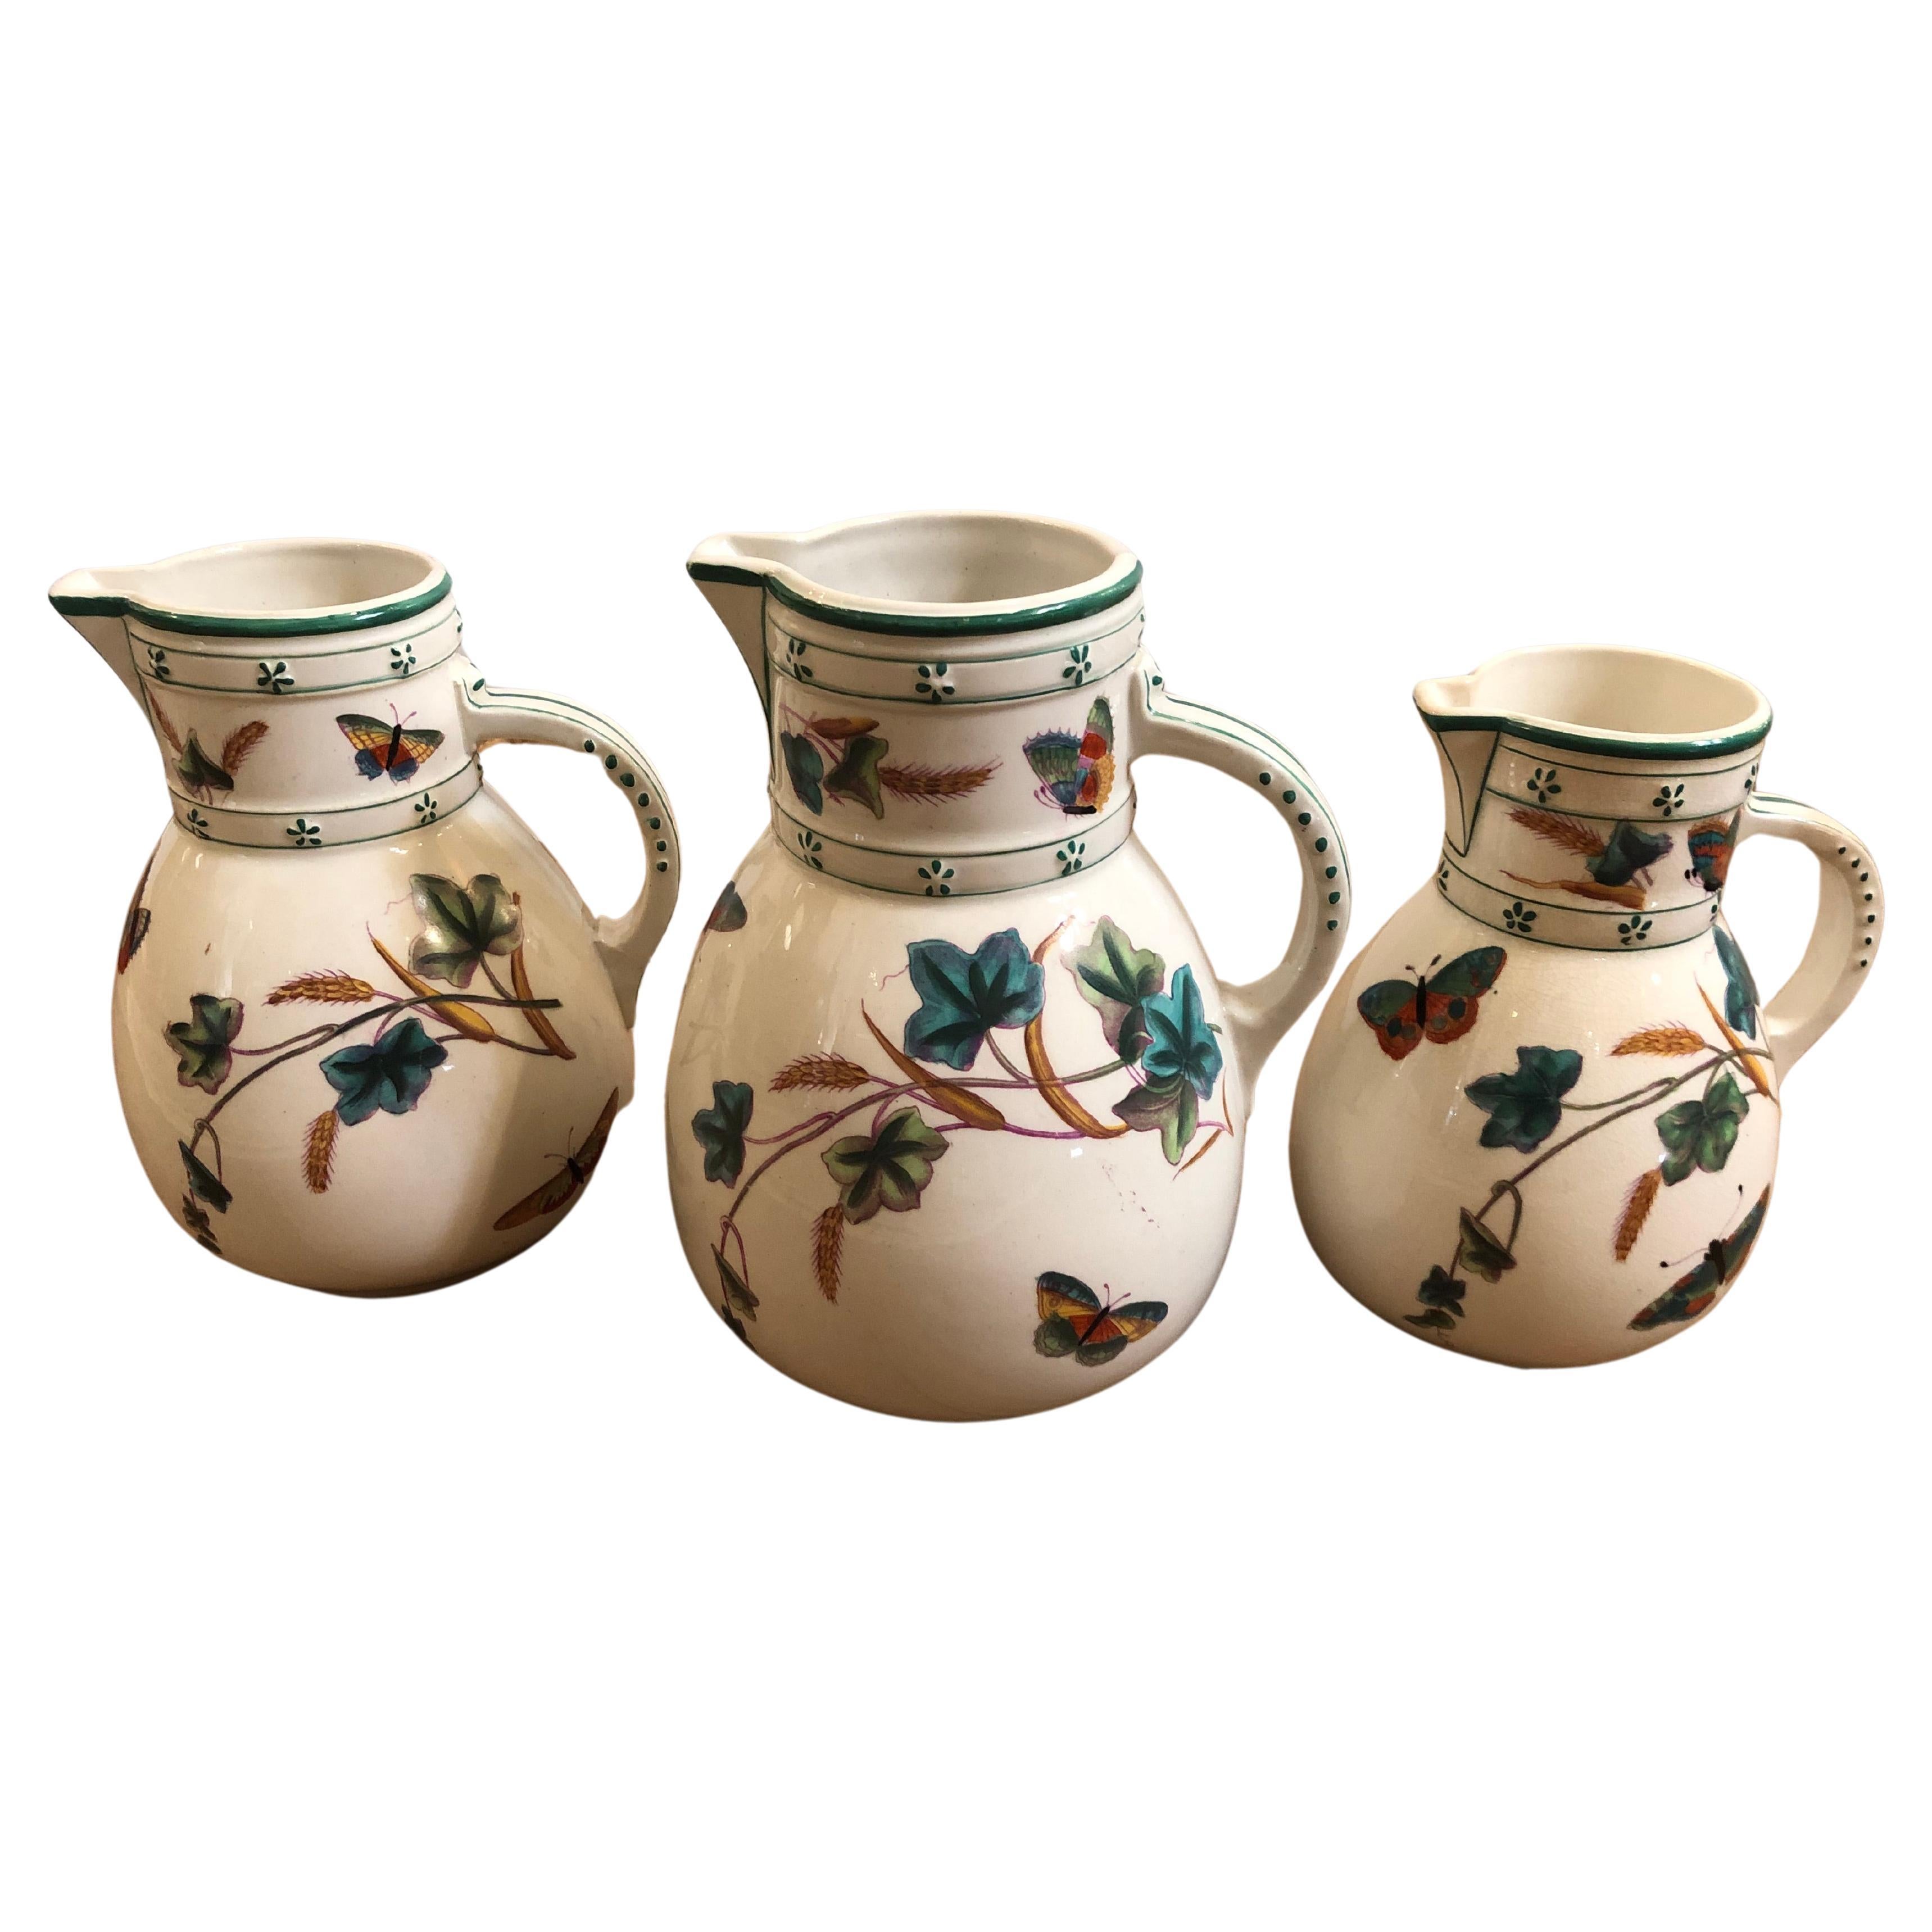 Lovely Collection of 3 Antique English Porcelain Pitchers For Sale